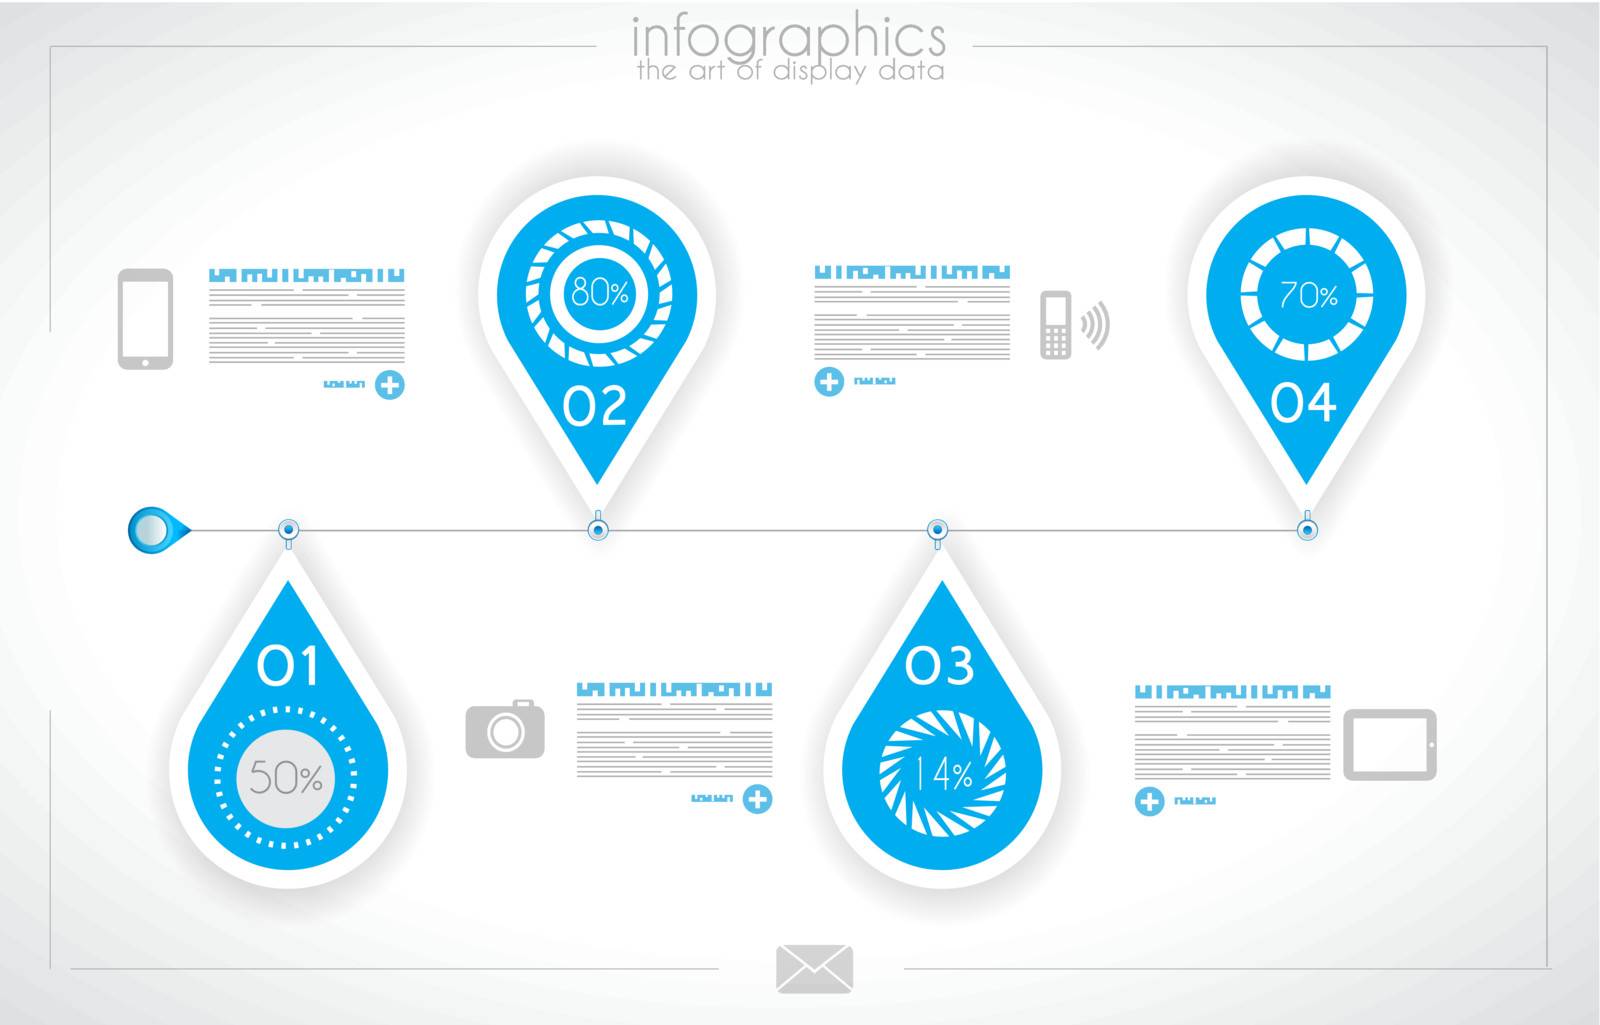 Infographic design for product ranking - original paper geometric shape with shadows. Ideal for statistic data display